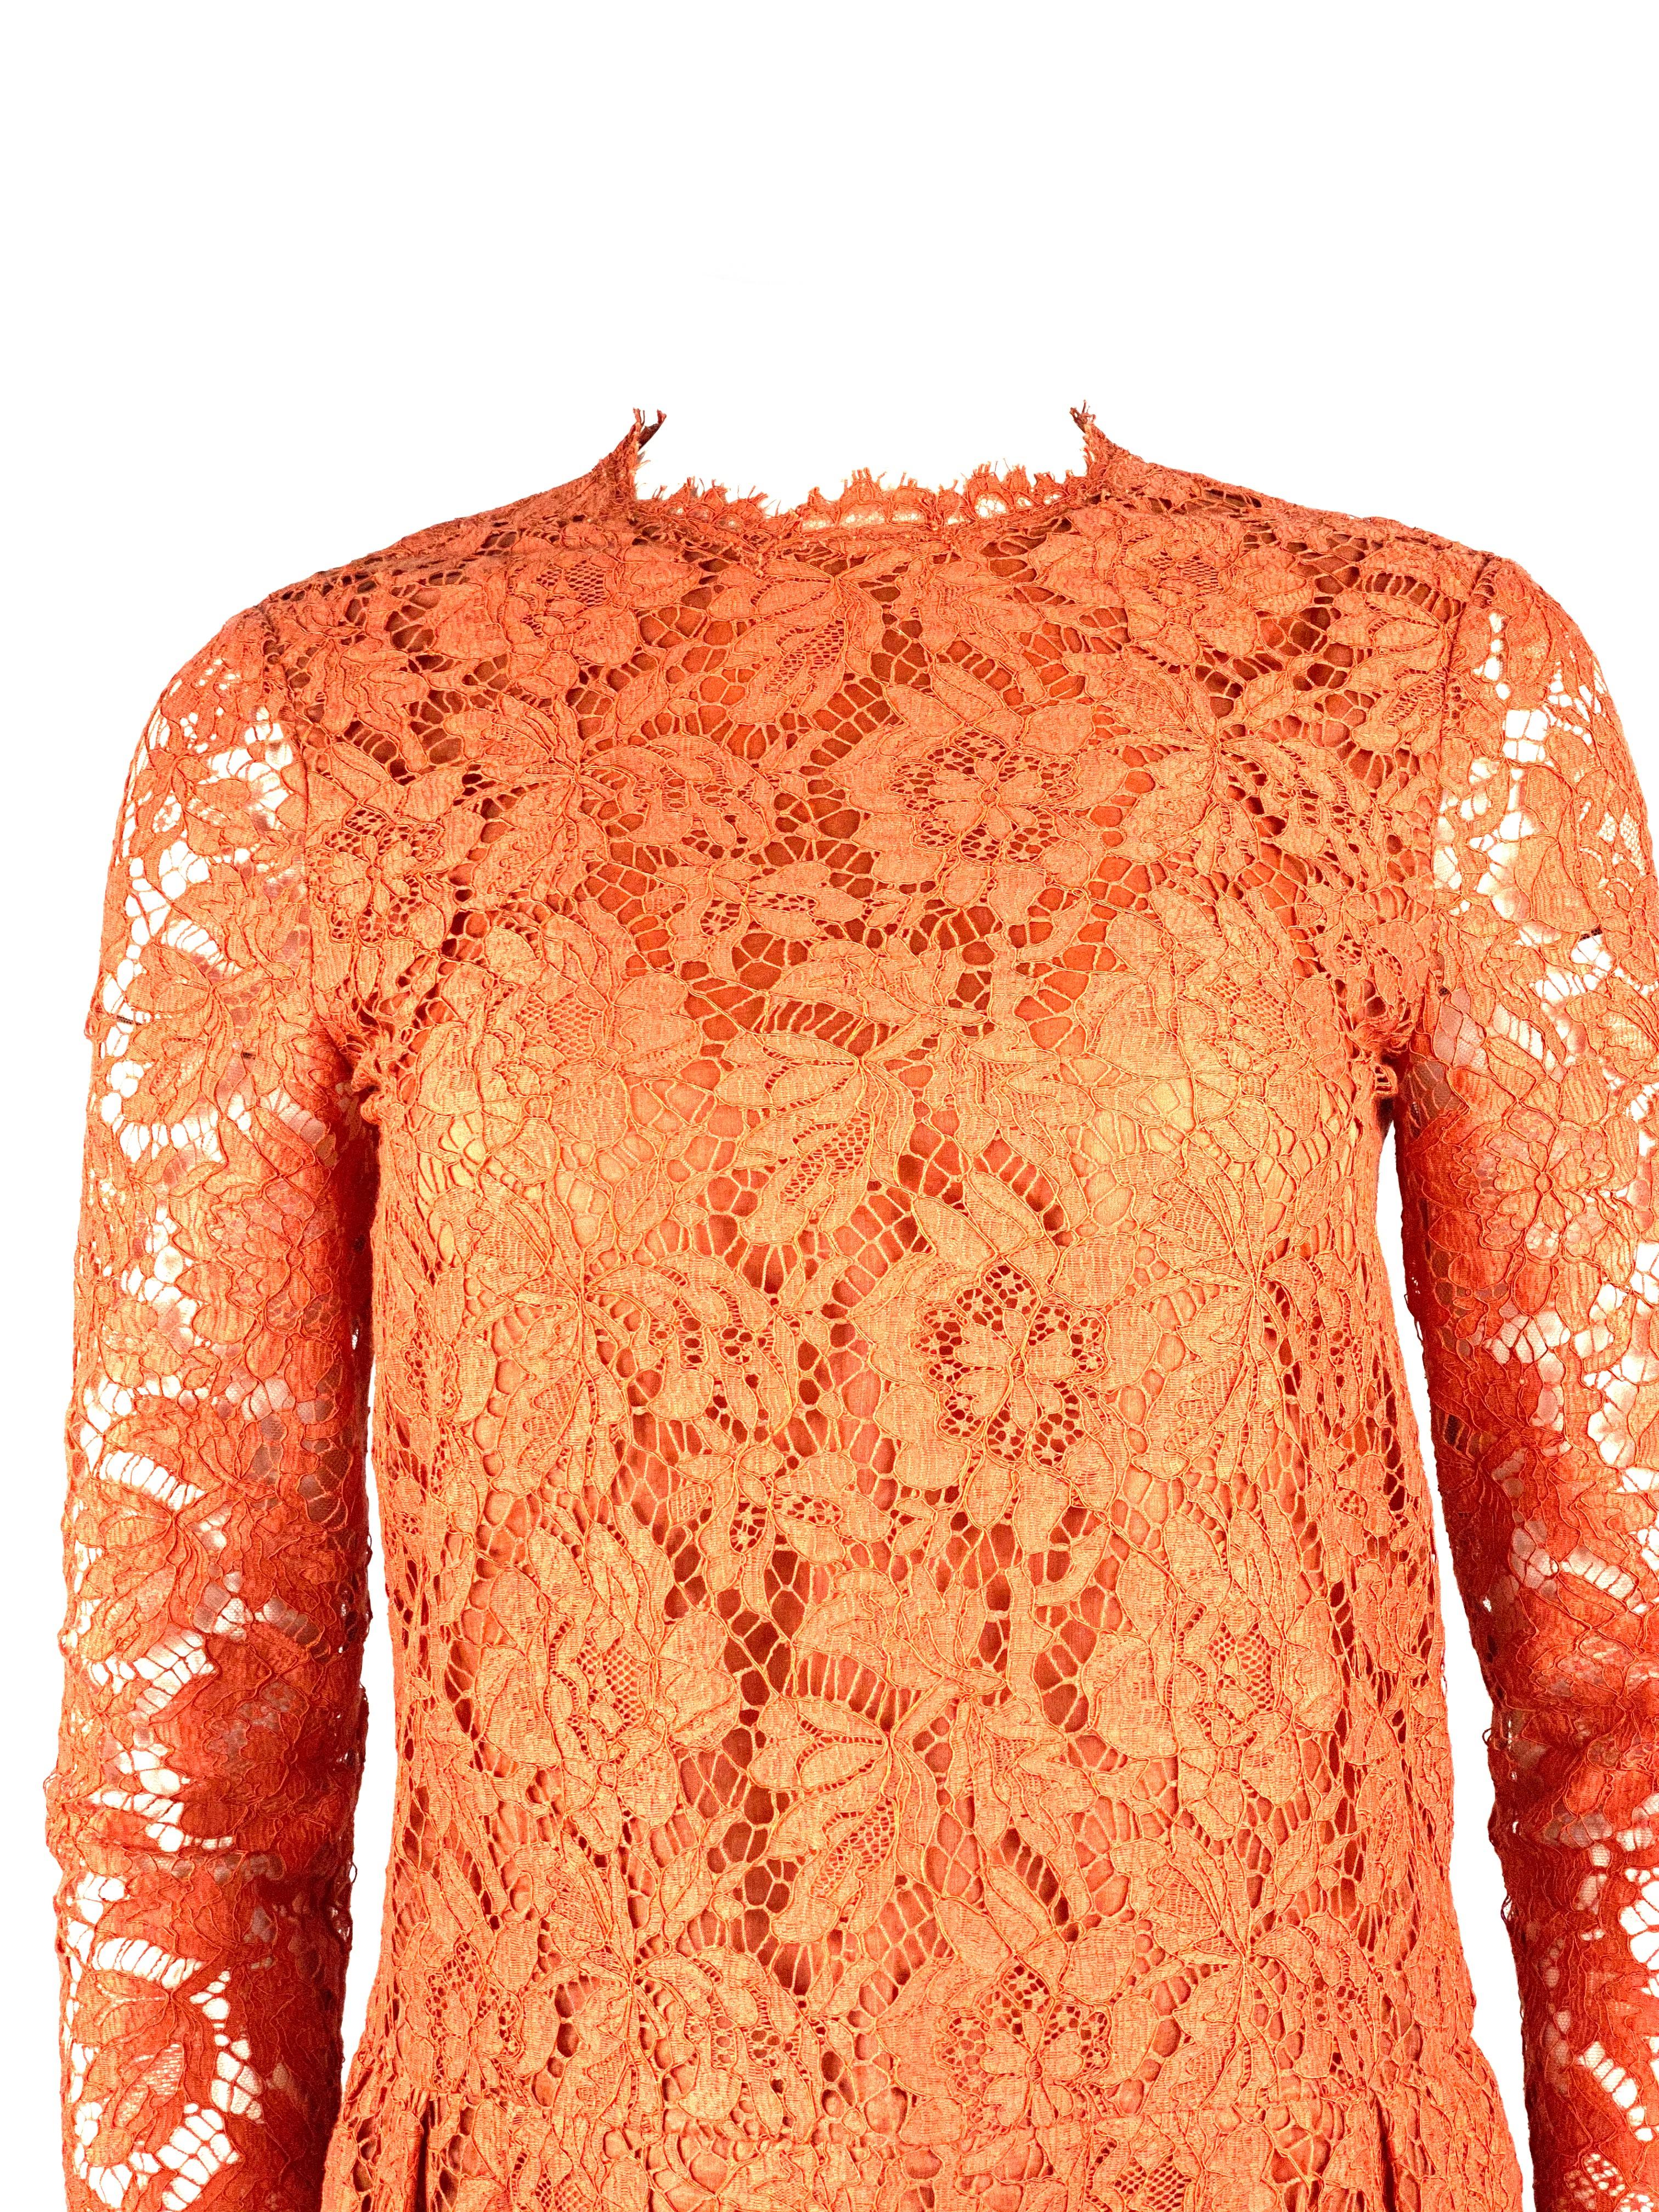 VALENTINO Spa Orange Floral Lace Long Sleeves Mini Dress Size 6

Product detail:
Size 6 
Orange Floral lace
Mini Dress
Long sleeves
One pocket on each side 
Rear zip and hook closure
Made in Italy
